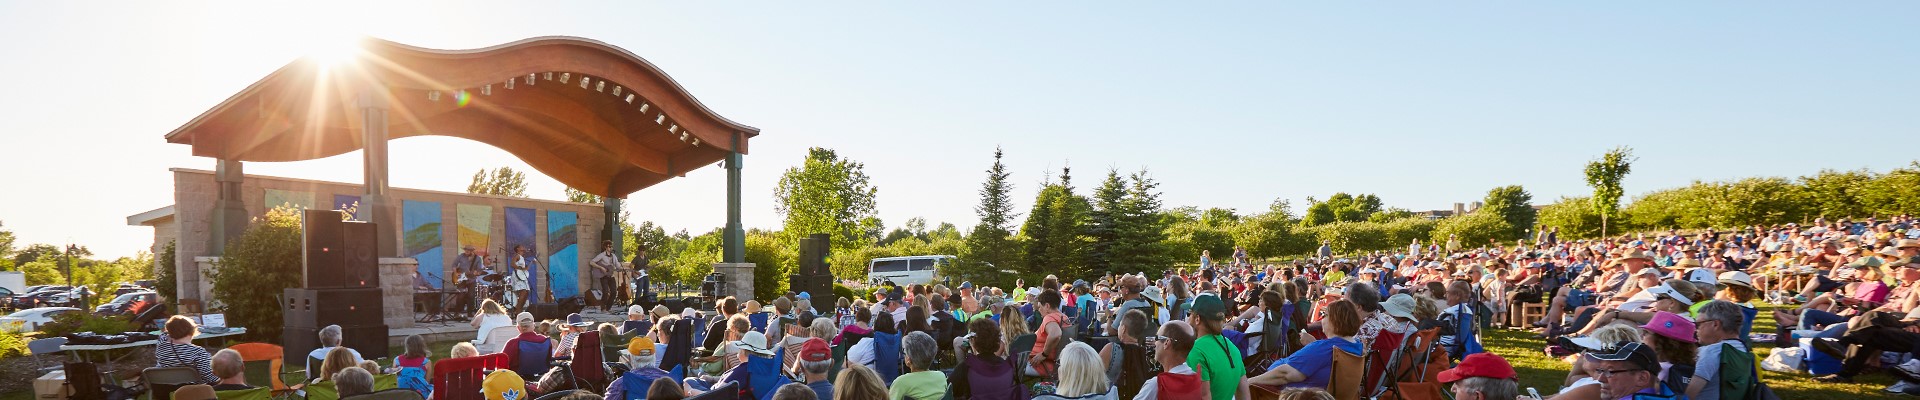 Large crowd at an outdoor performance